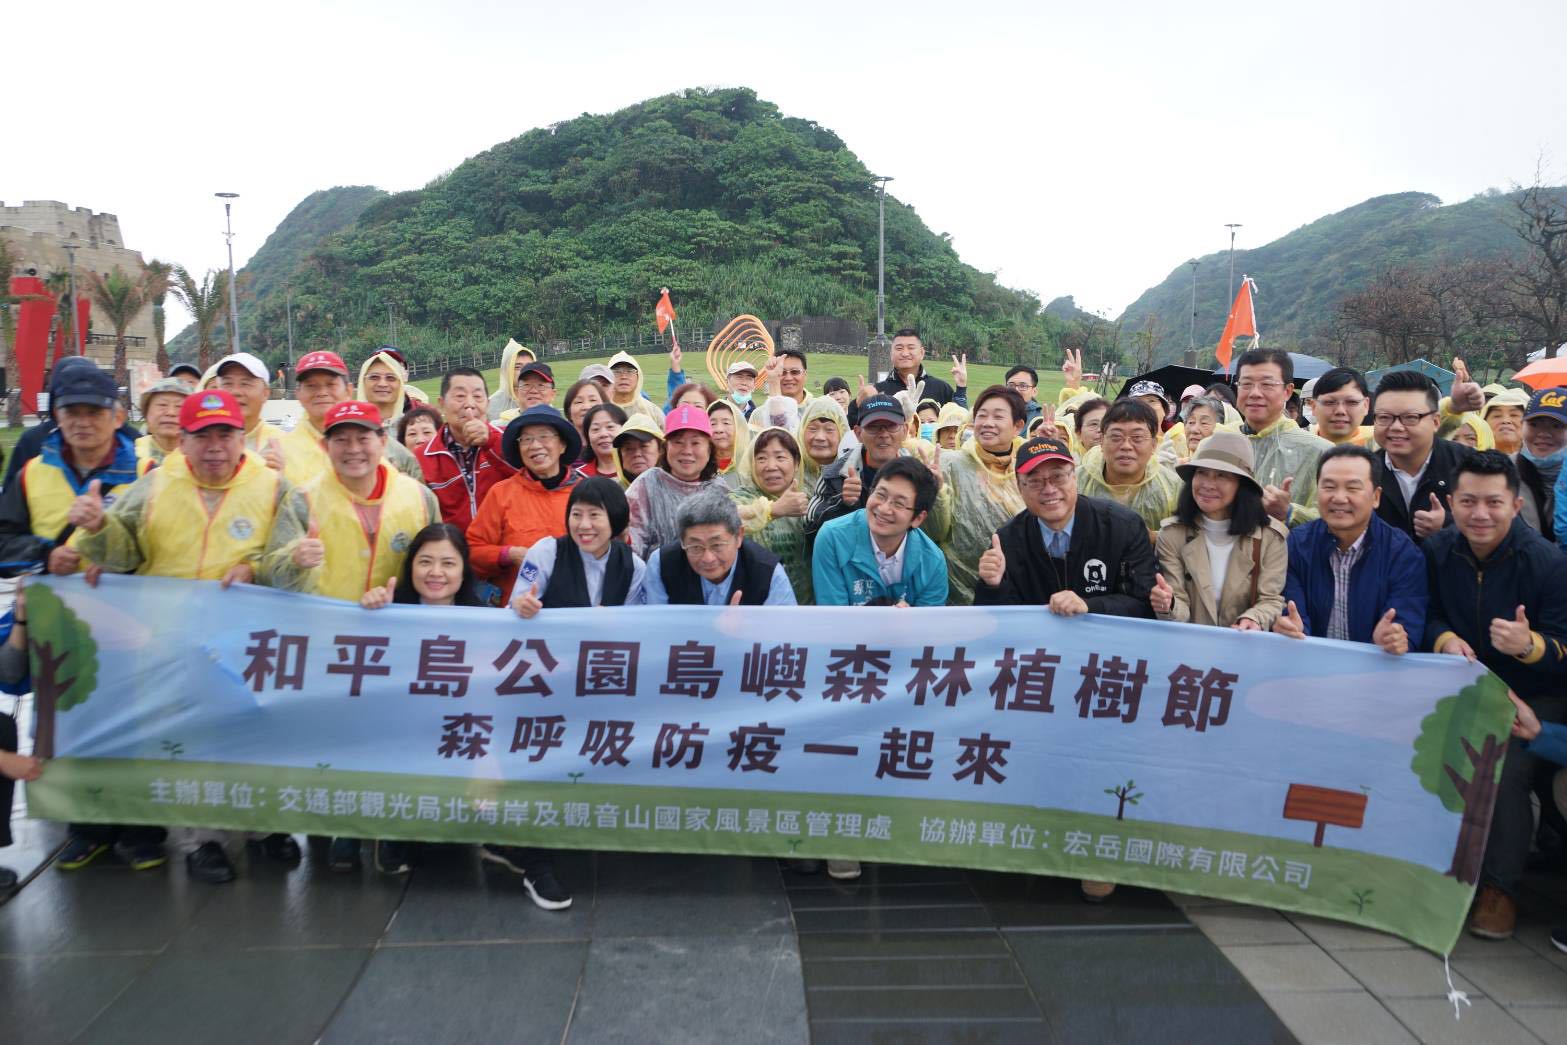 a hundred people gathered up at Heping Island Park to grow trees and invoke blessings together